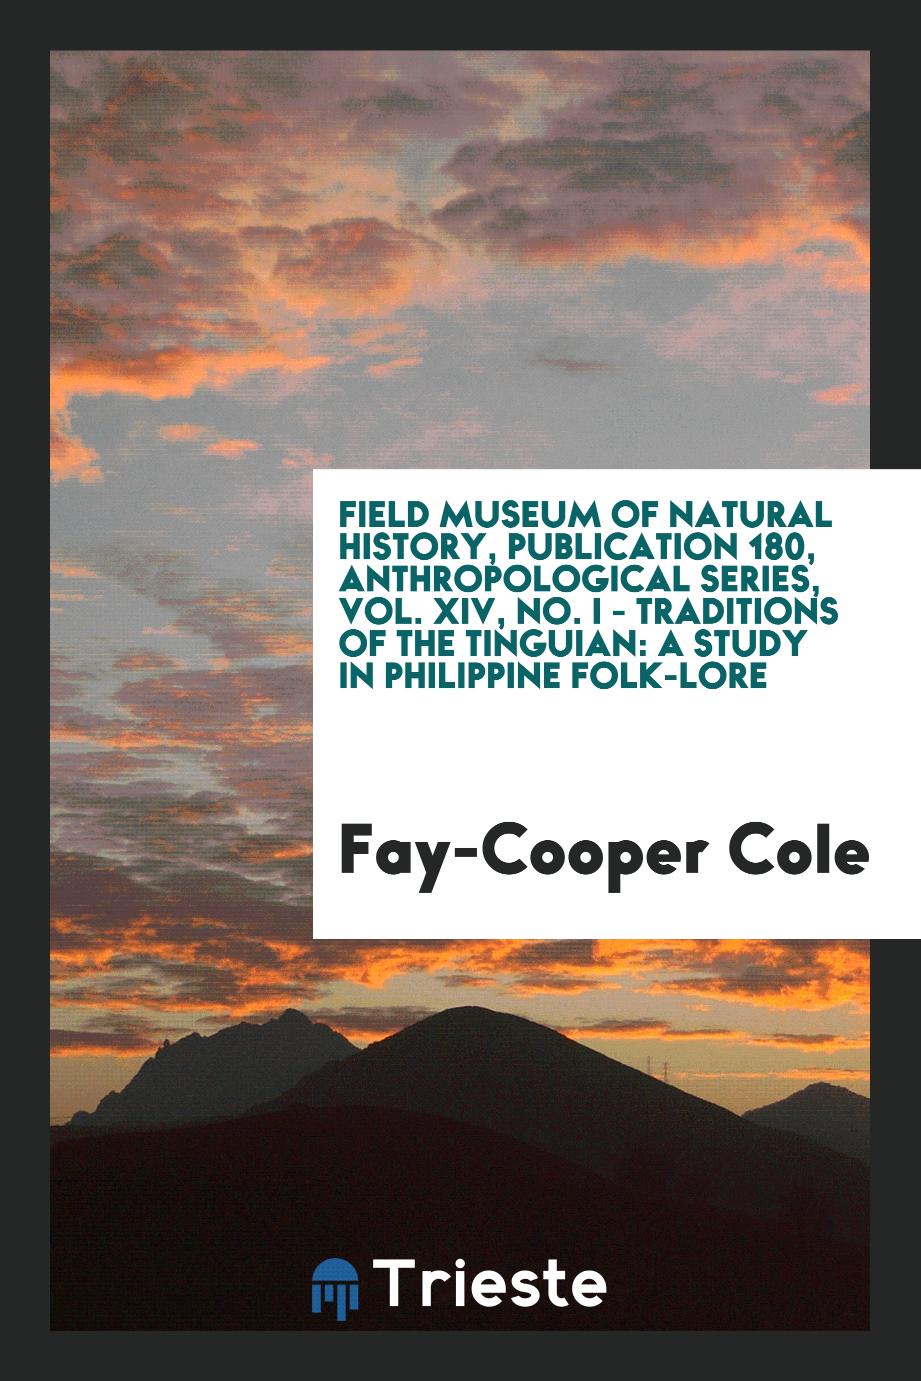 Field museum of natural history, Publication 180, Anthropological Series, Vol. XIV, No. I - Traditions of the Tinguian: a study in Philippine folk-lore